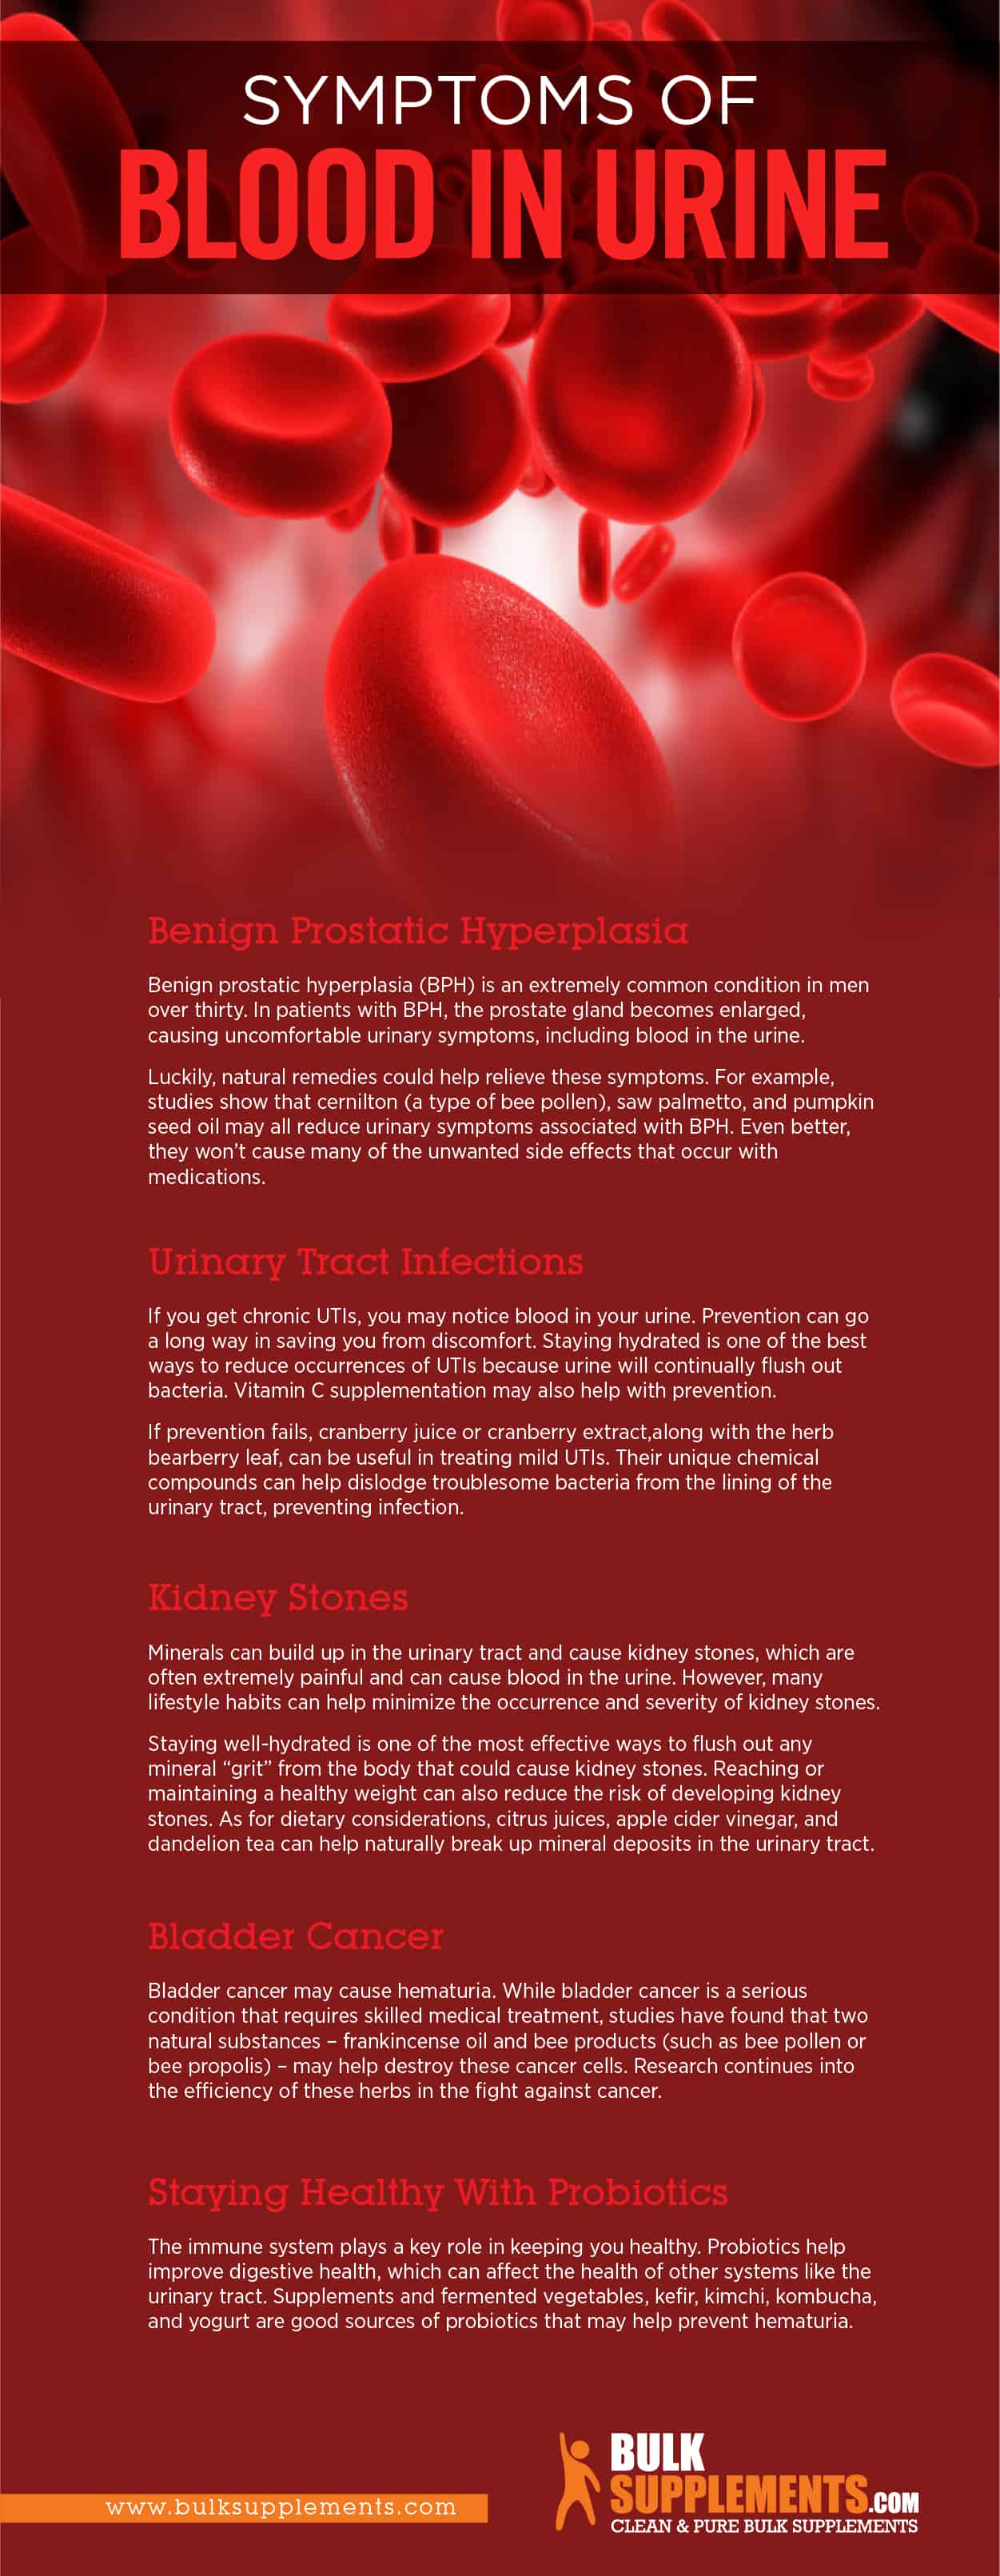 Blood in Urine Infographic